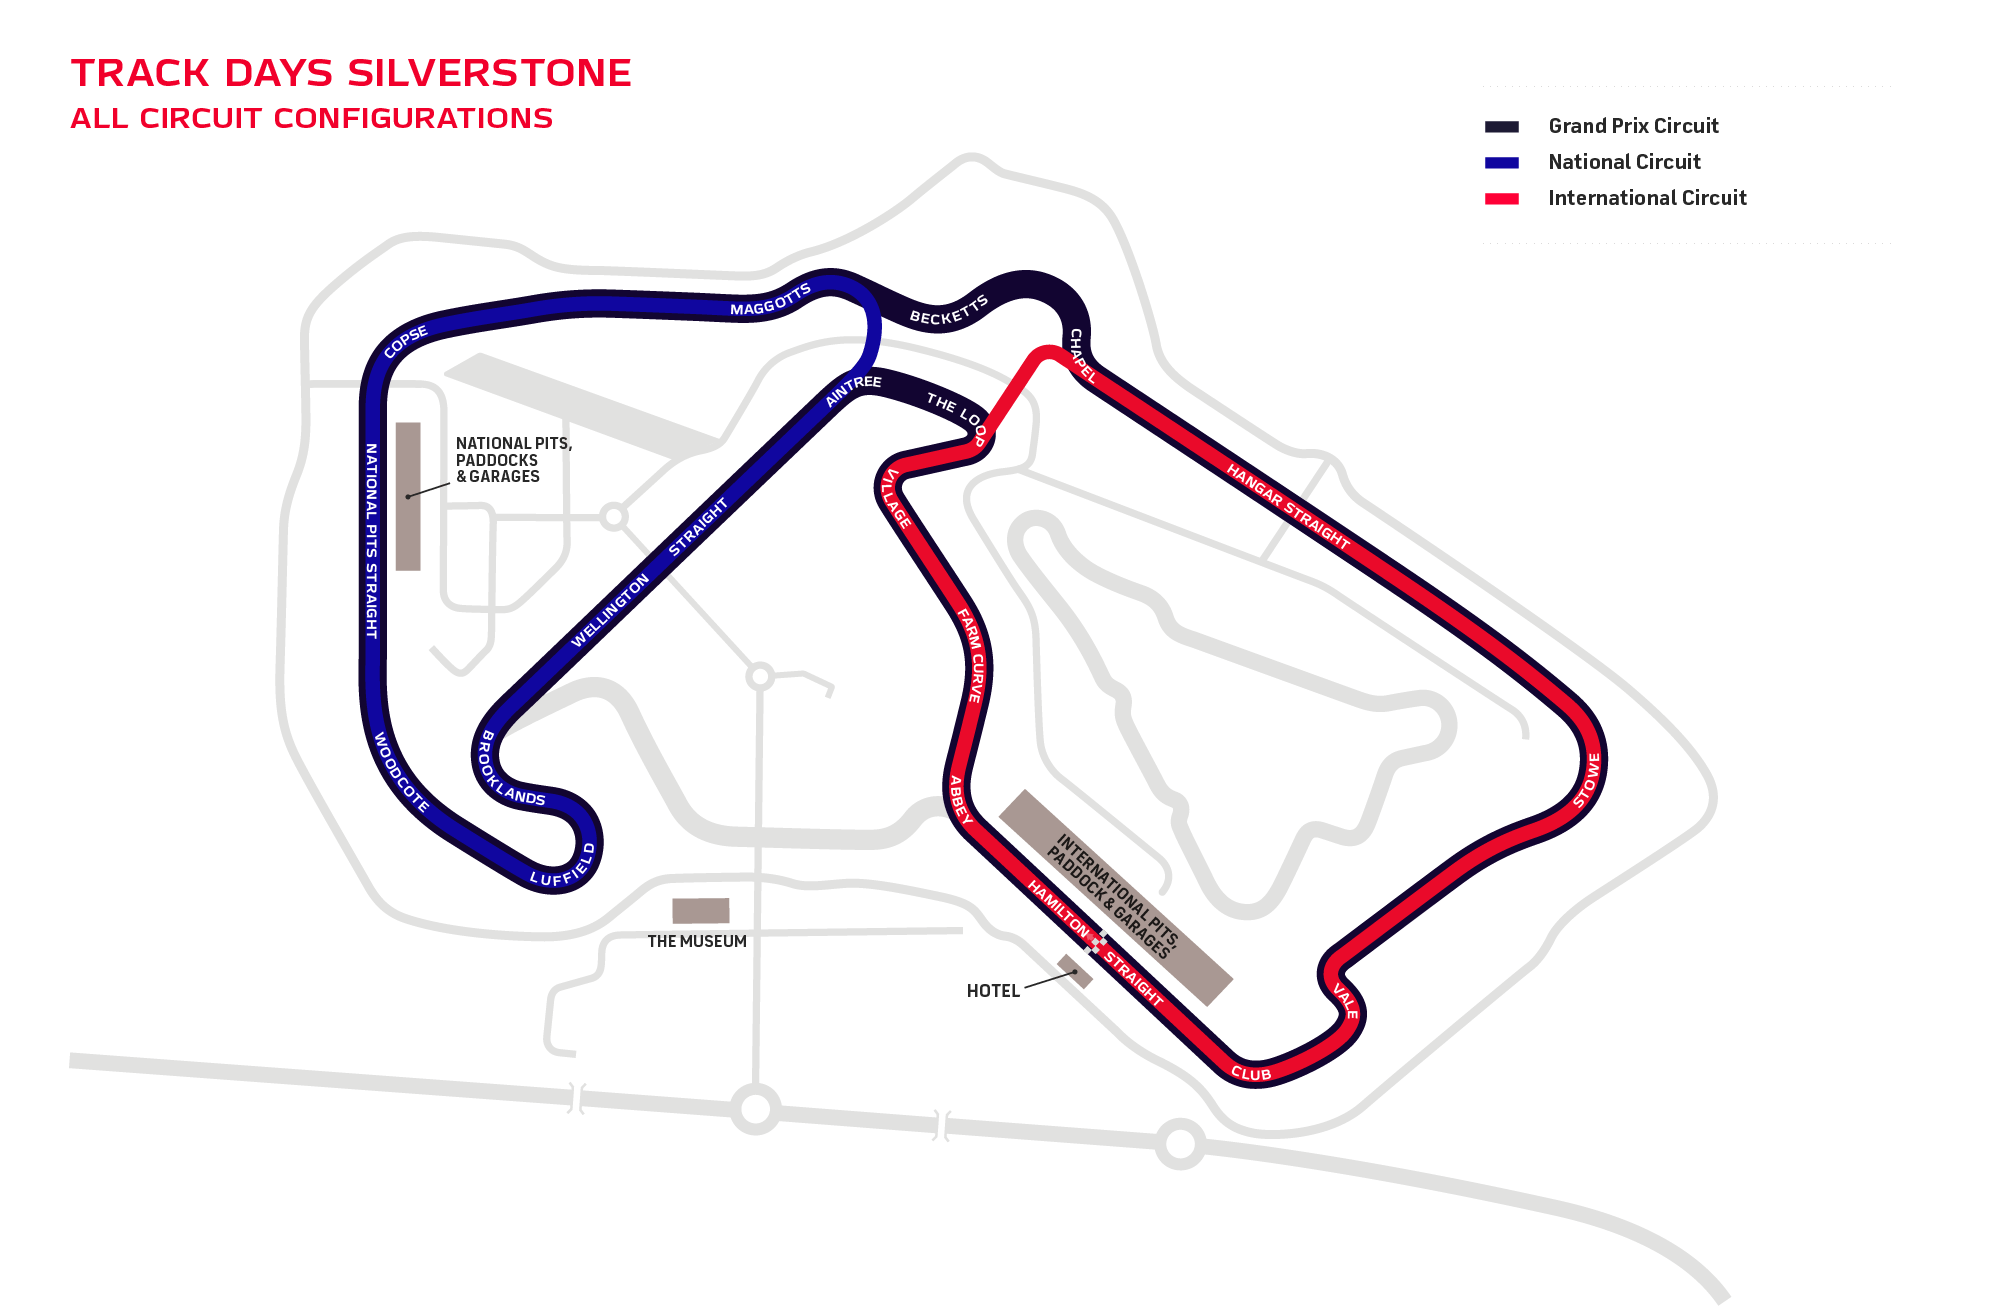 Track Days circuits at Silverstone